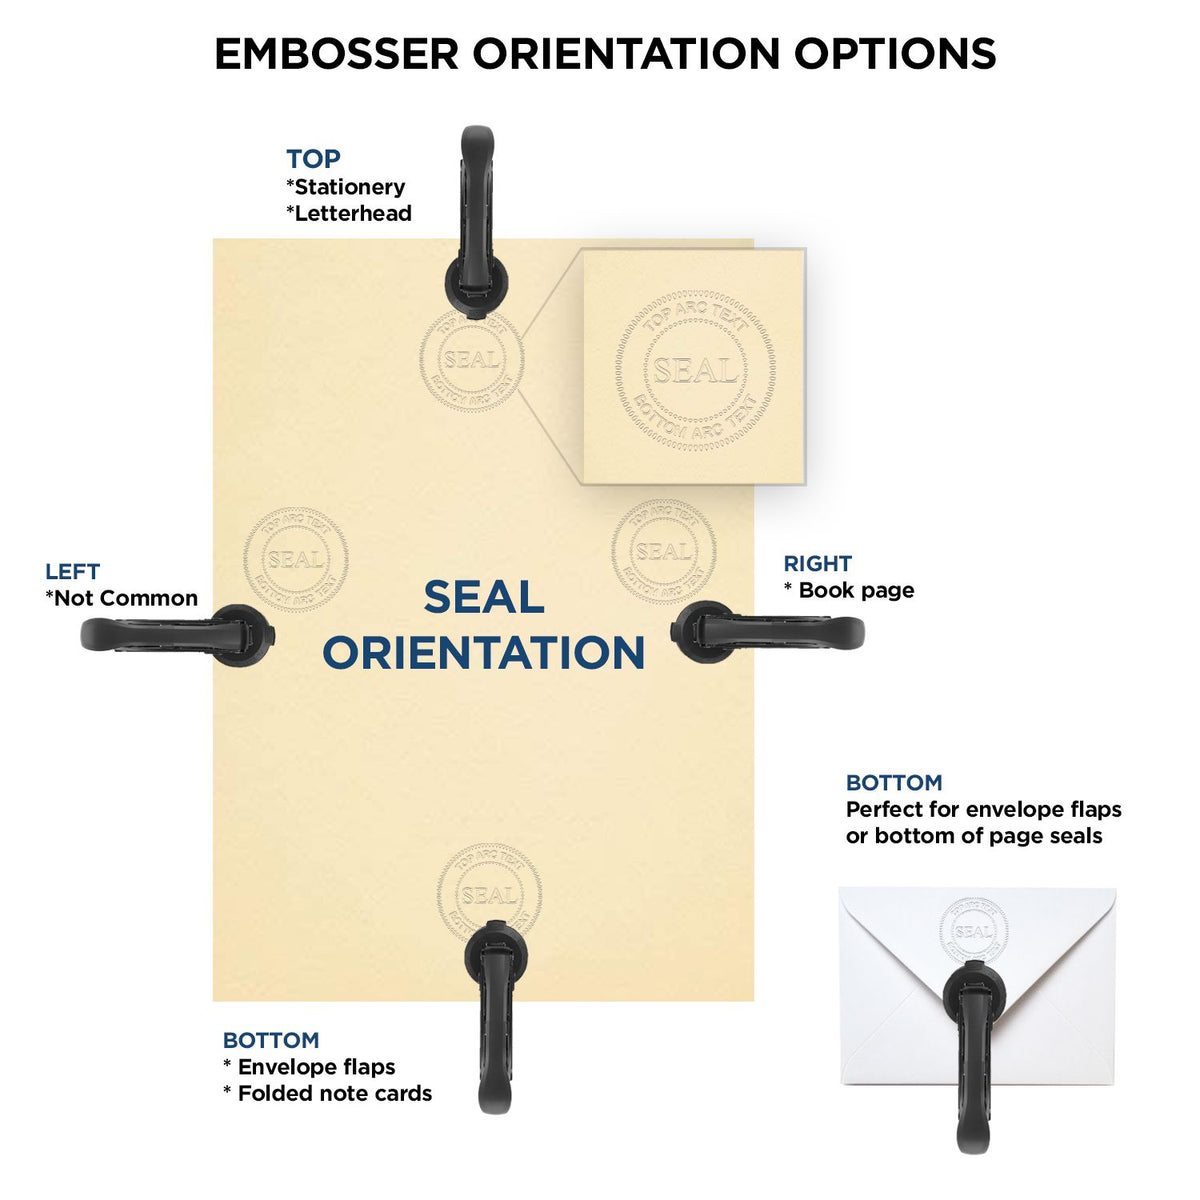 An infographic for the Extended Long Reach Georgia Surveyor Embosser showing embosser orientation, this is showing examples of a top, bottom, right and left insert.